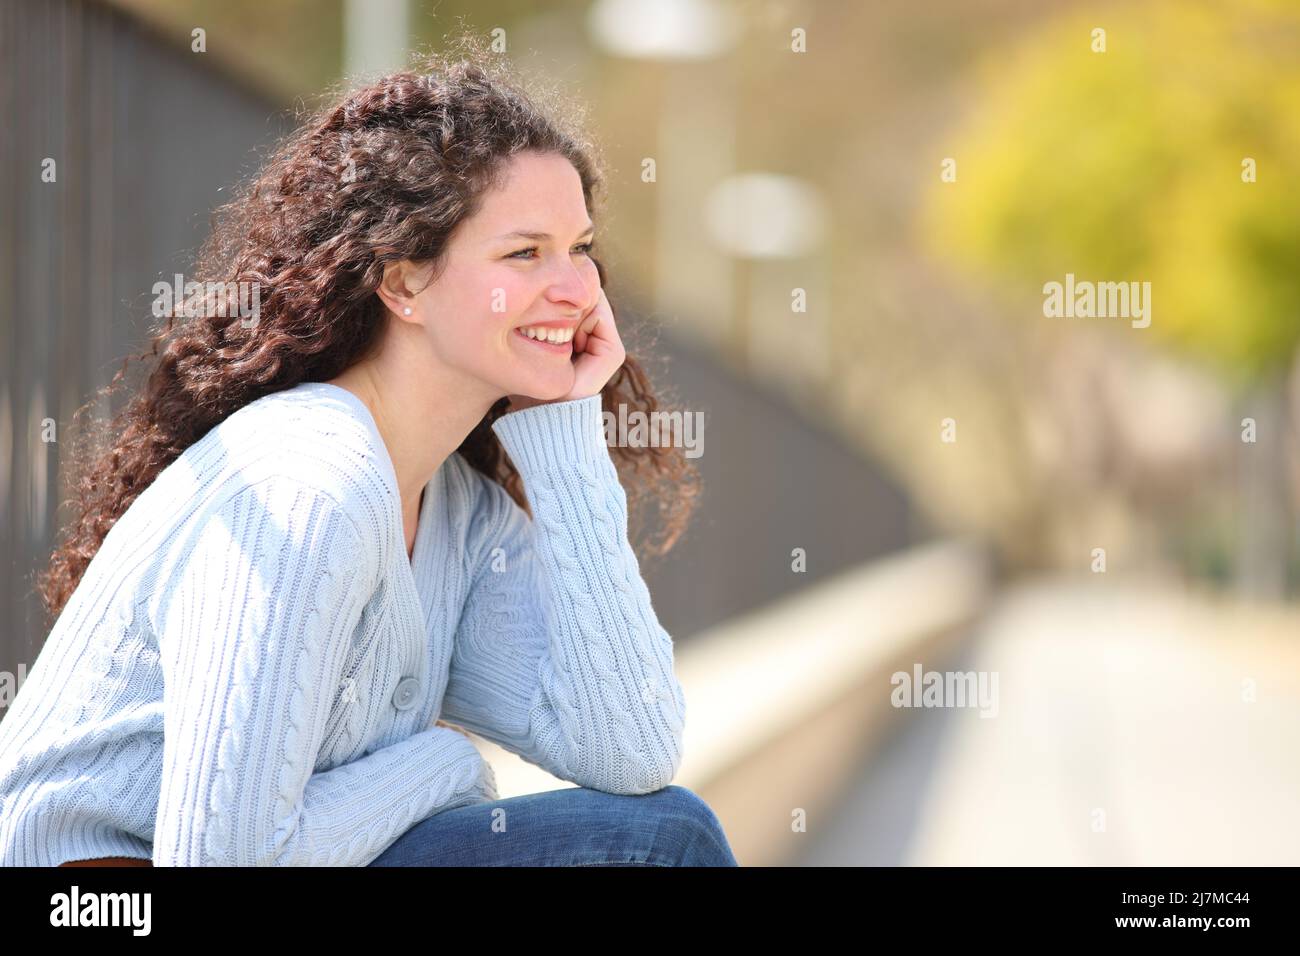 Happy woman contemplating and relaxing sitting in a park a sunny day Stock Photo